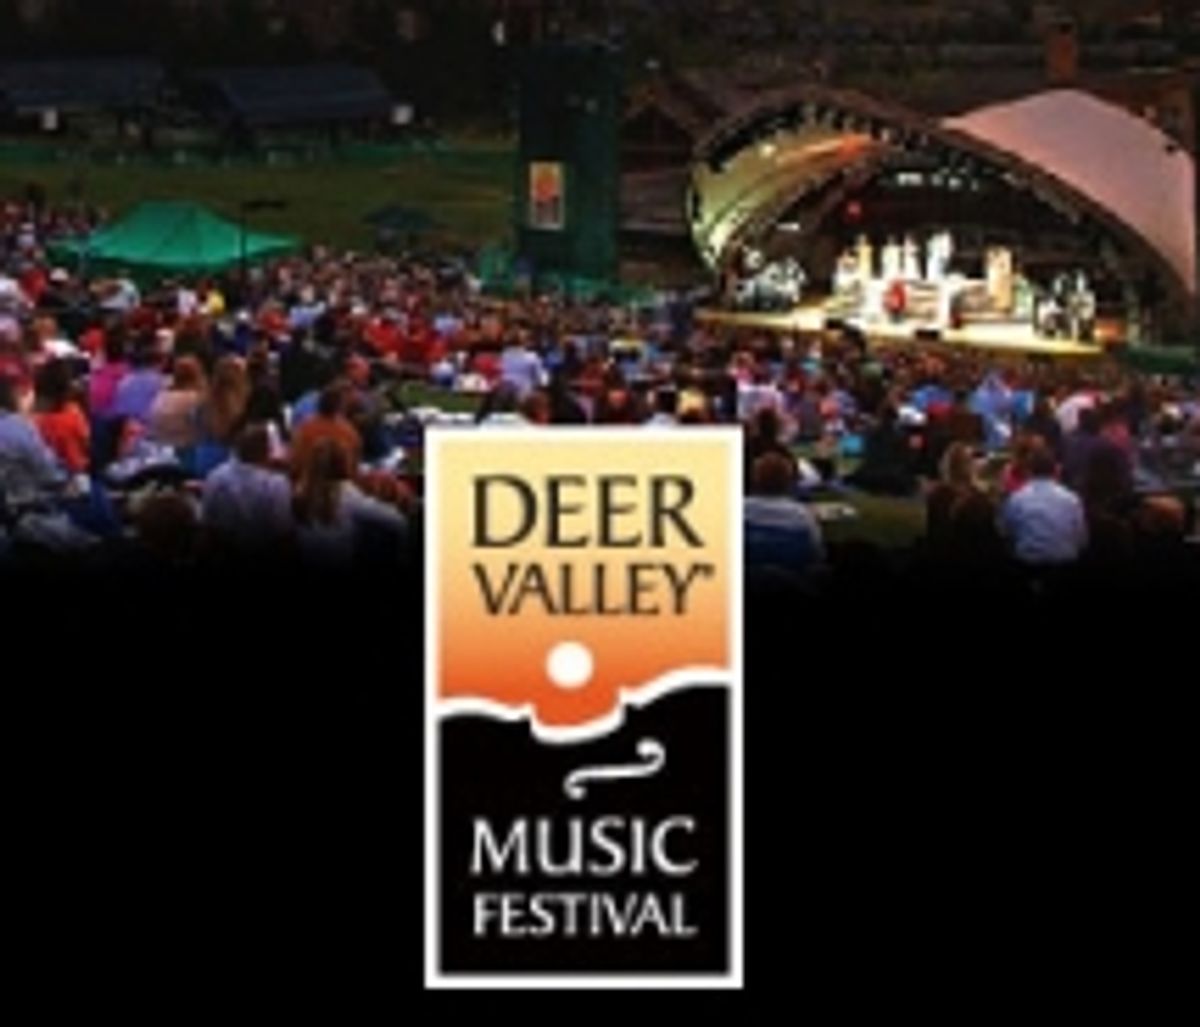 Condoleezza Rice to Perform at Deer Valley Music Festival Benefit